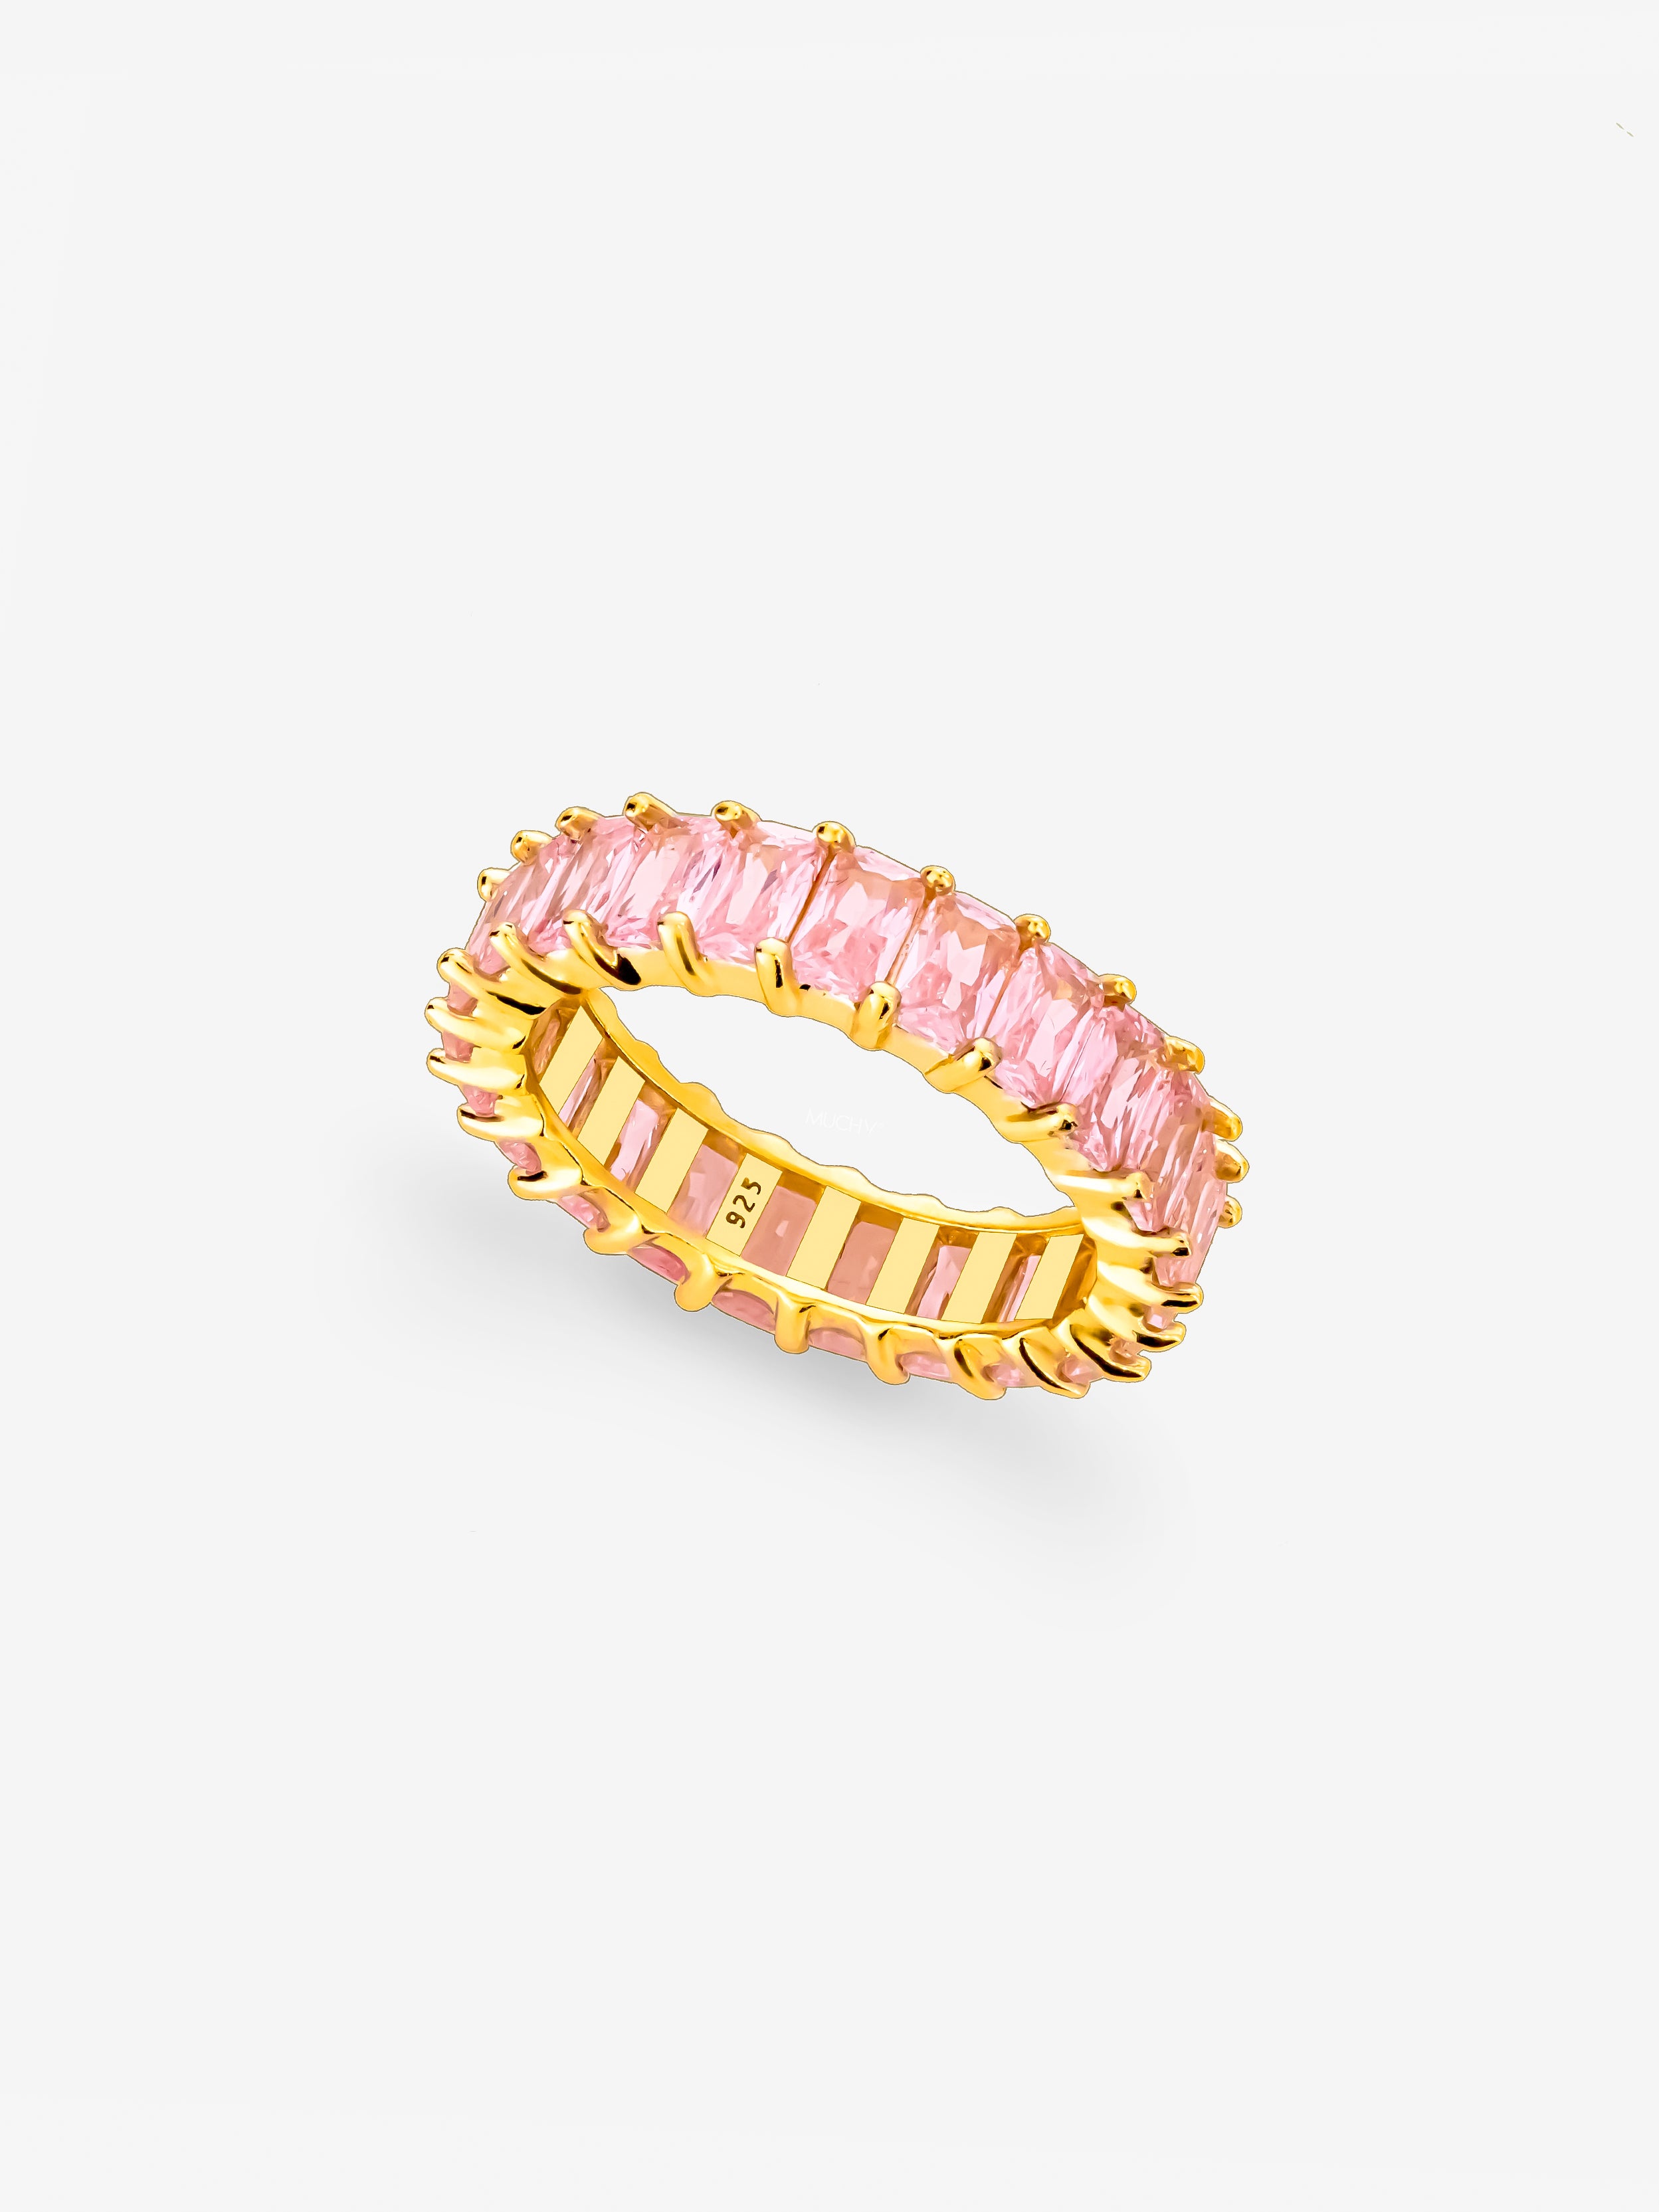 Gold Stacking Ring With Pink Stones